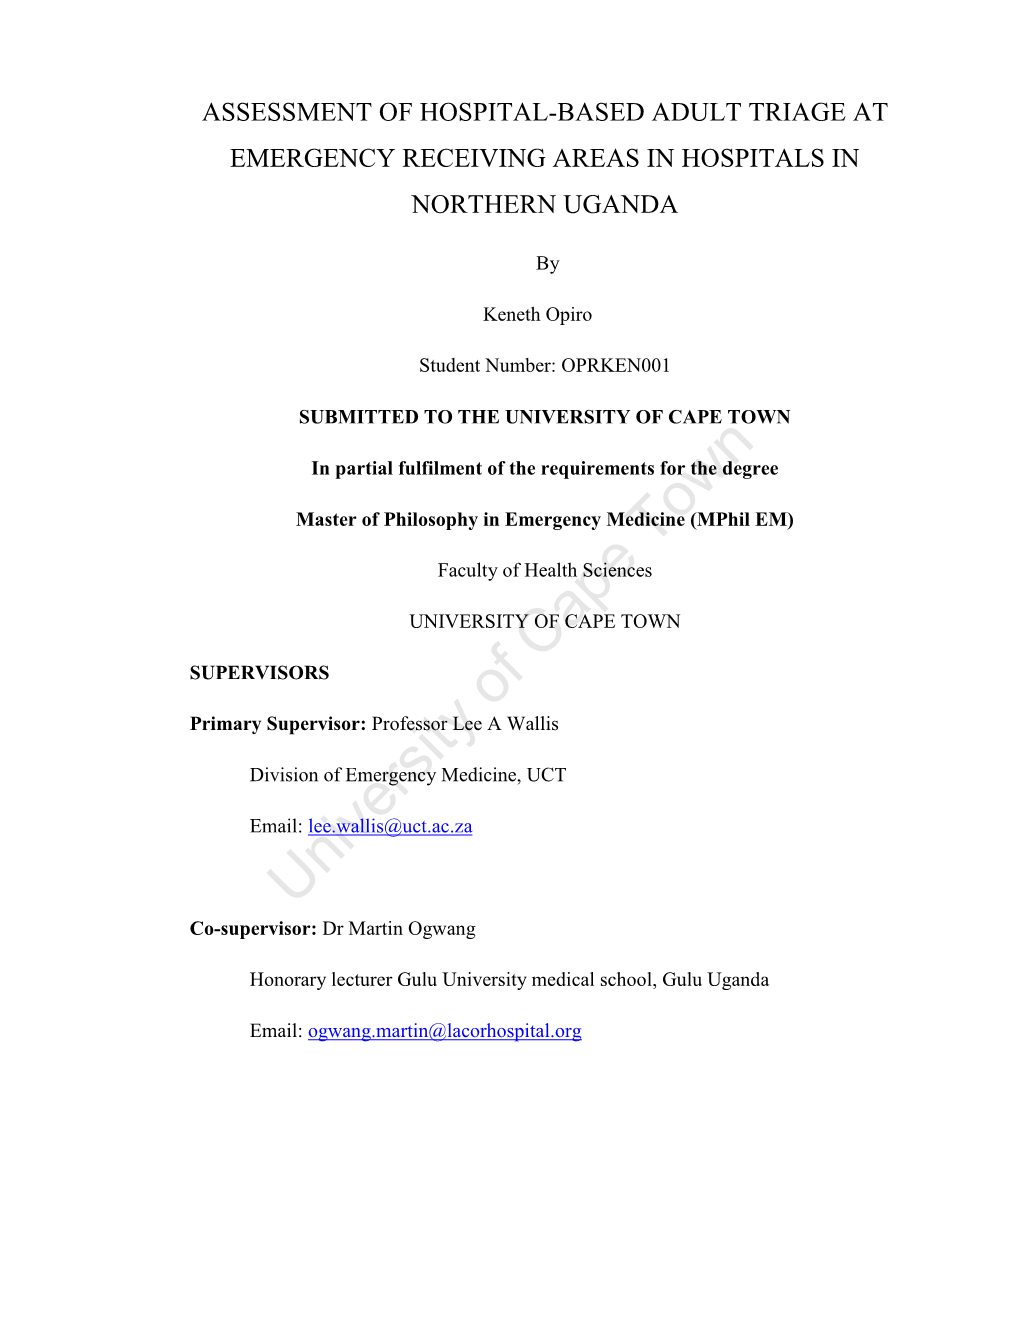 Assessment of Hospital-Based Adult Triage at Emergency Receiving Areas in Hospitals in Northern Uganda